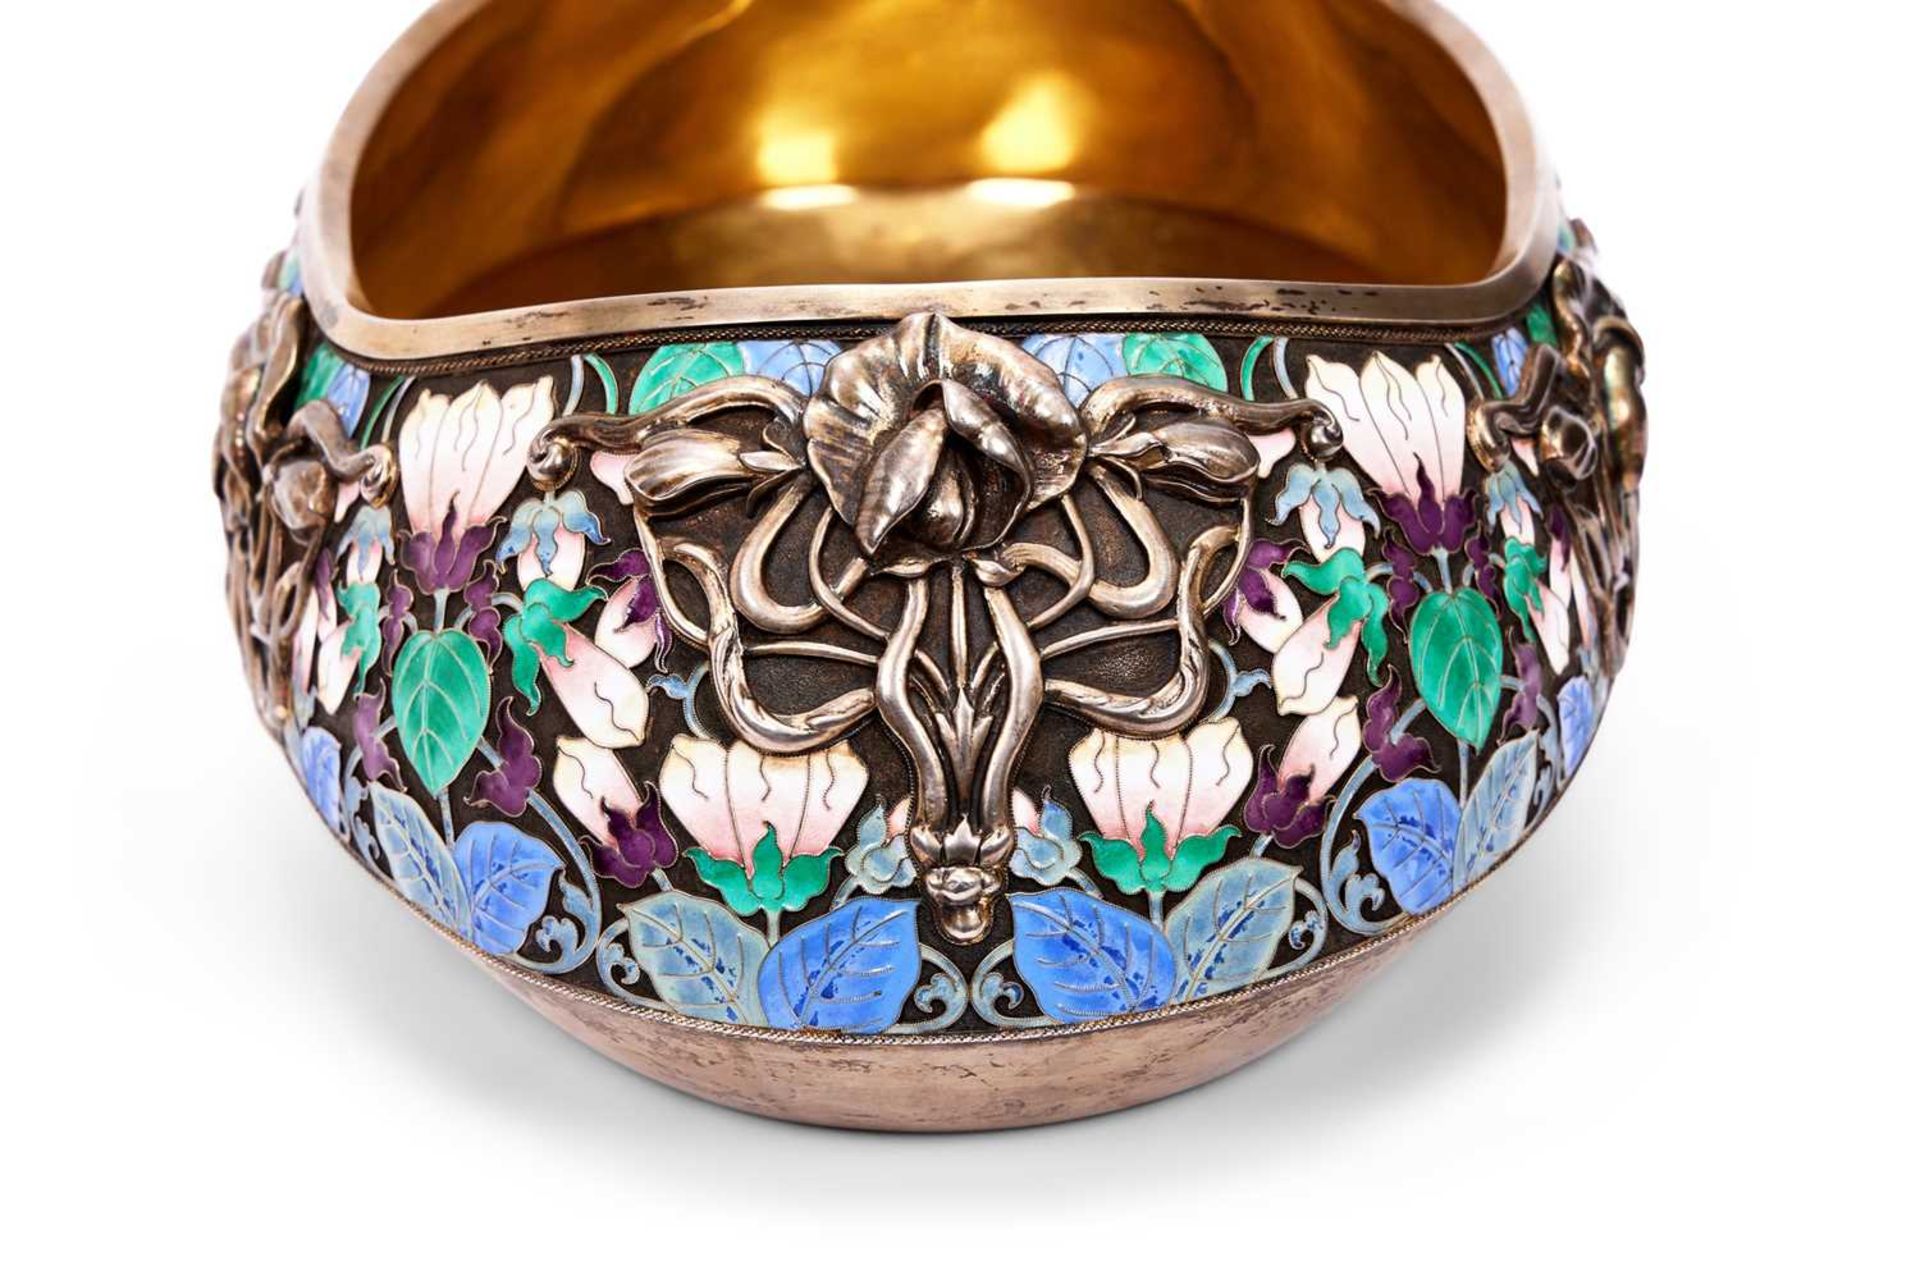 A MASSIVE EARLY 20TH CENTURY RUSSIAN SILVER AND ENAMEL KOVSH IN THE FORM OF A SWAN - Image 3 of 28